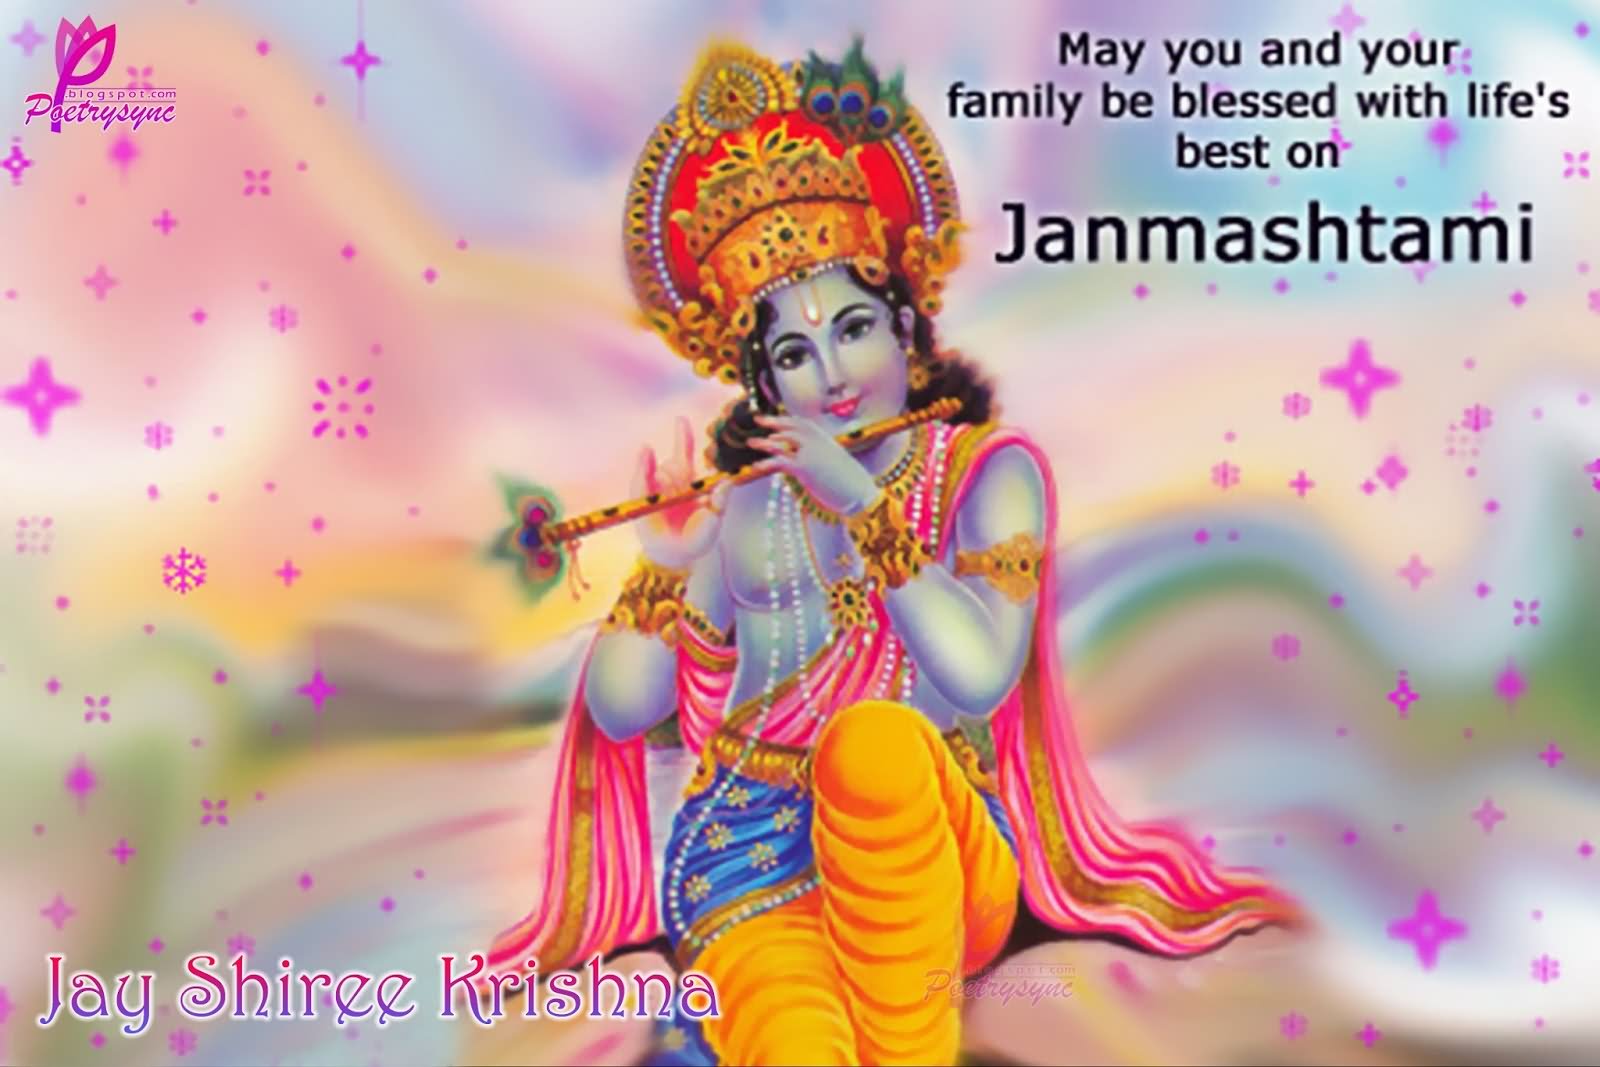 May You And Your Family Be Blessed With Life's Best On Janmashtami Greeting Card